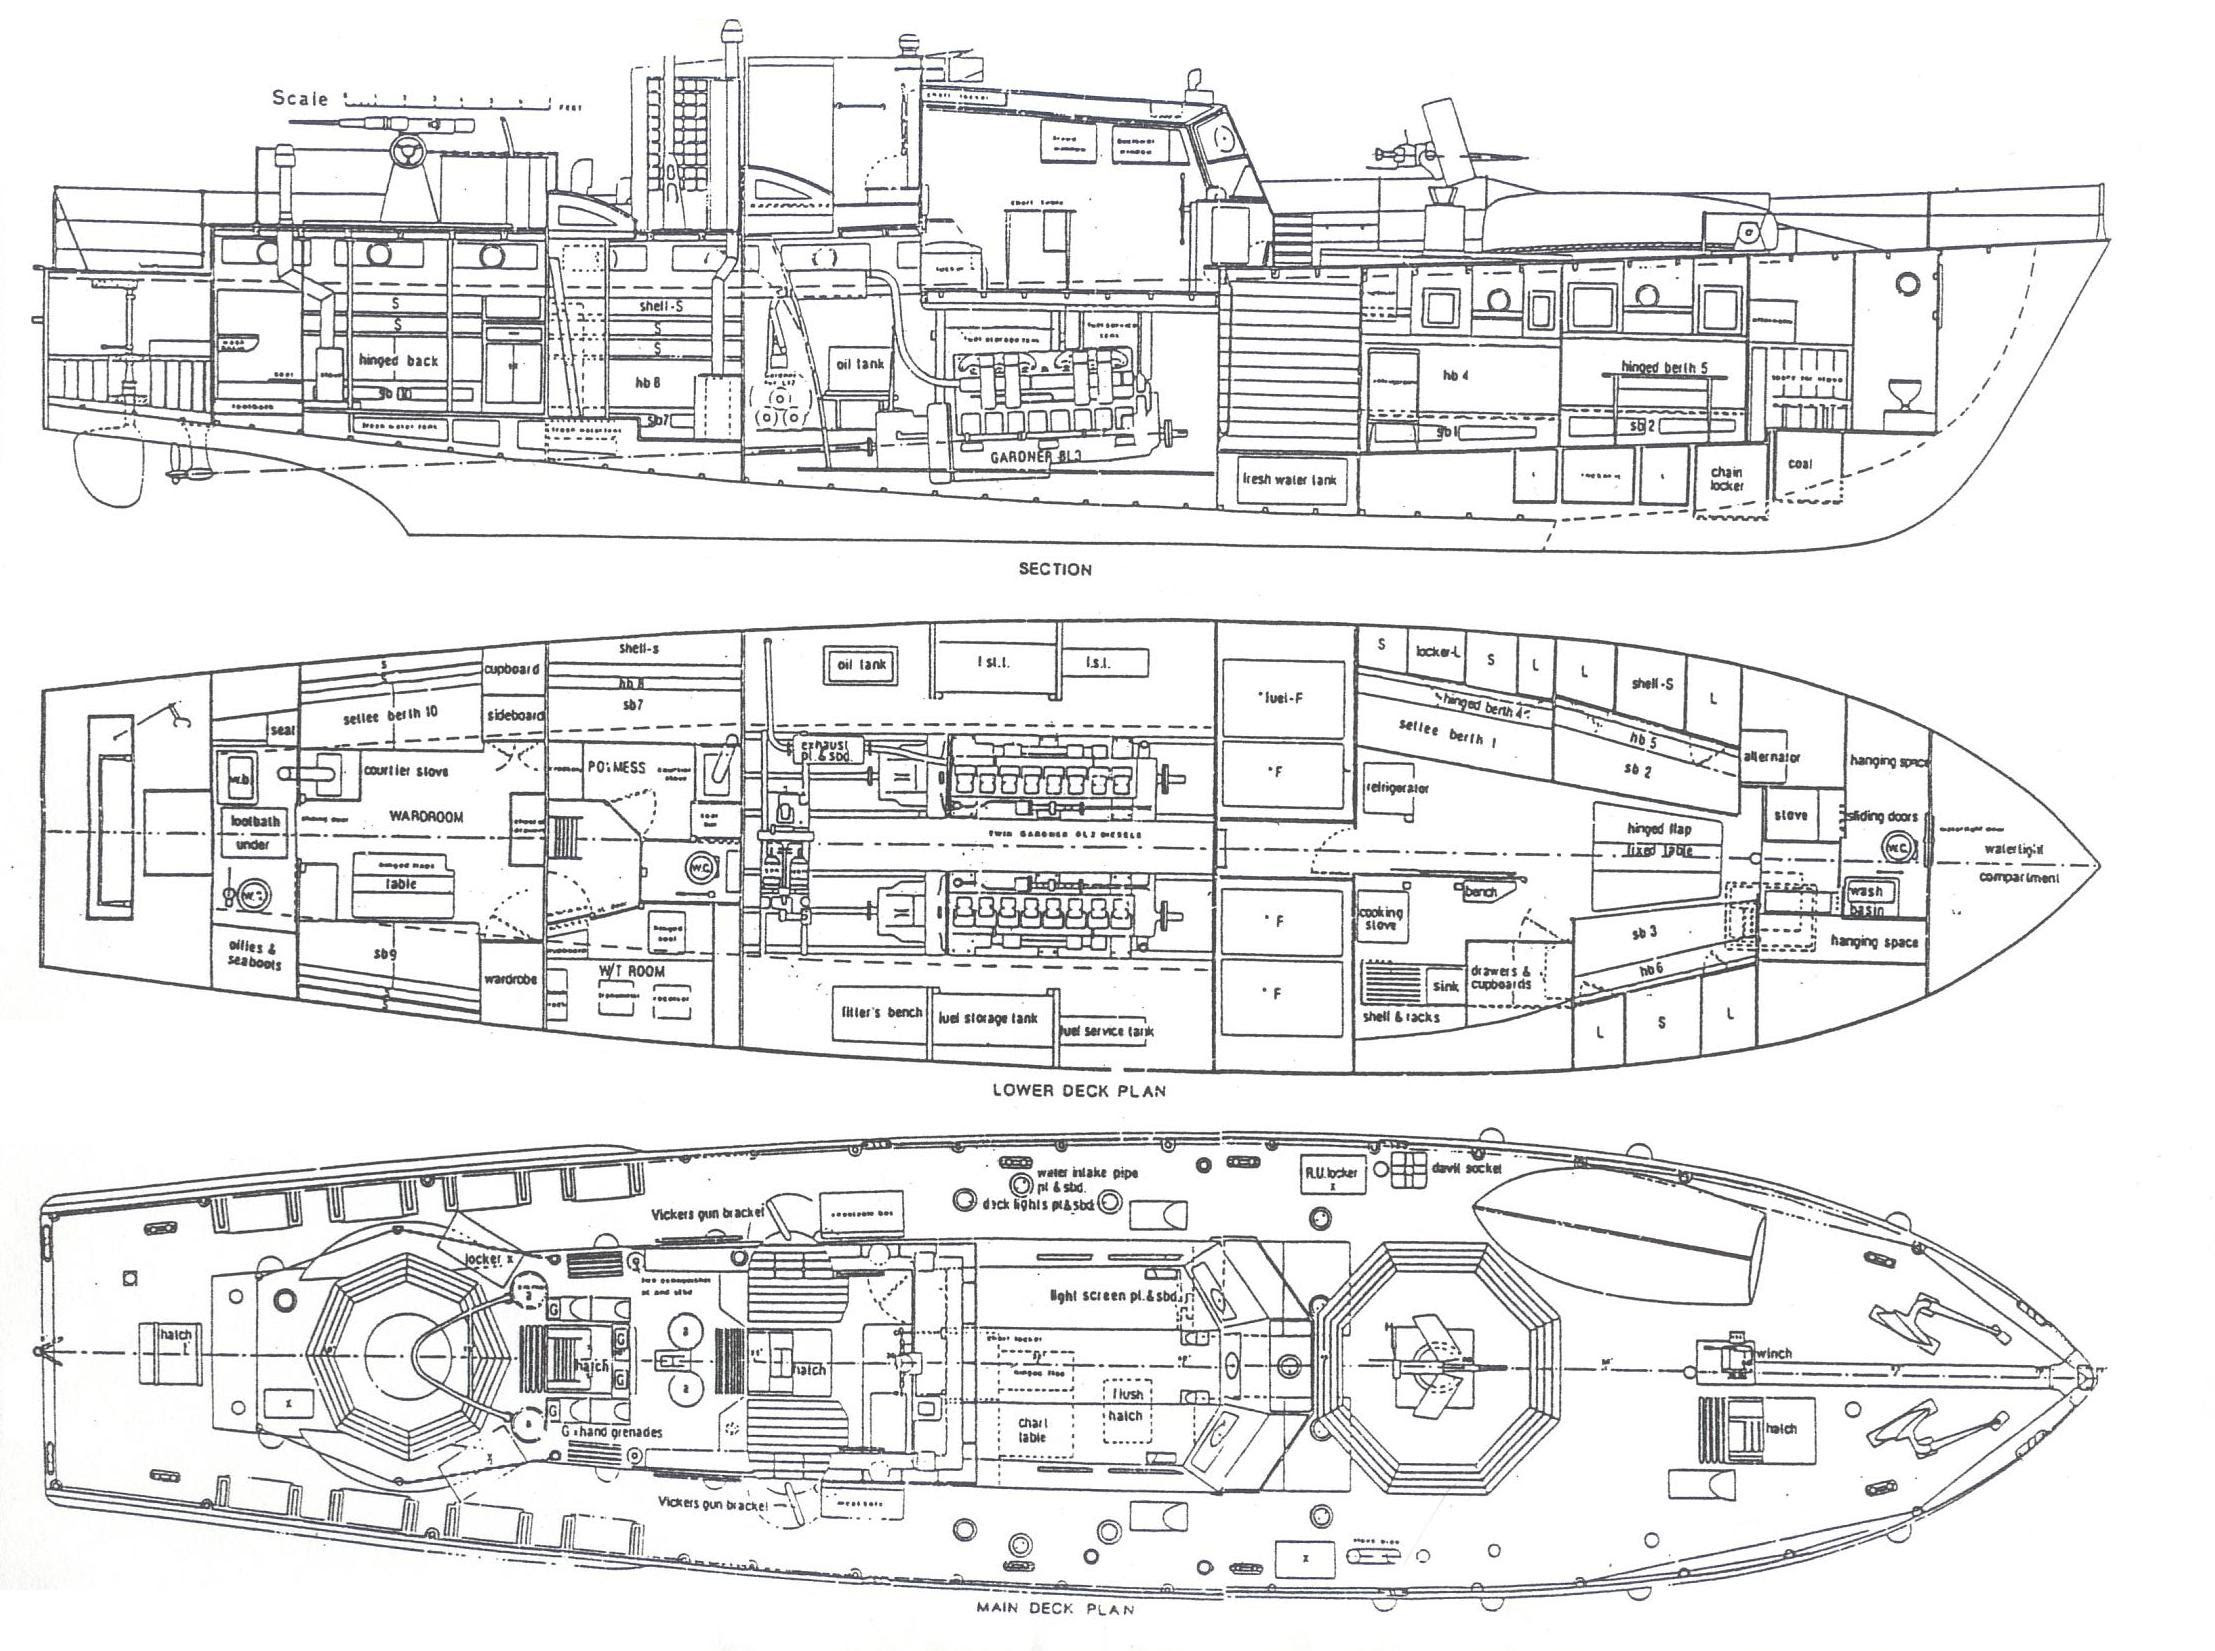 Space Cargo Ship Deck Plan - Pics about space